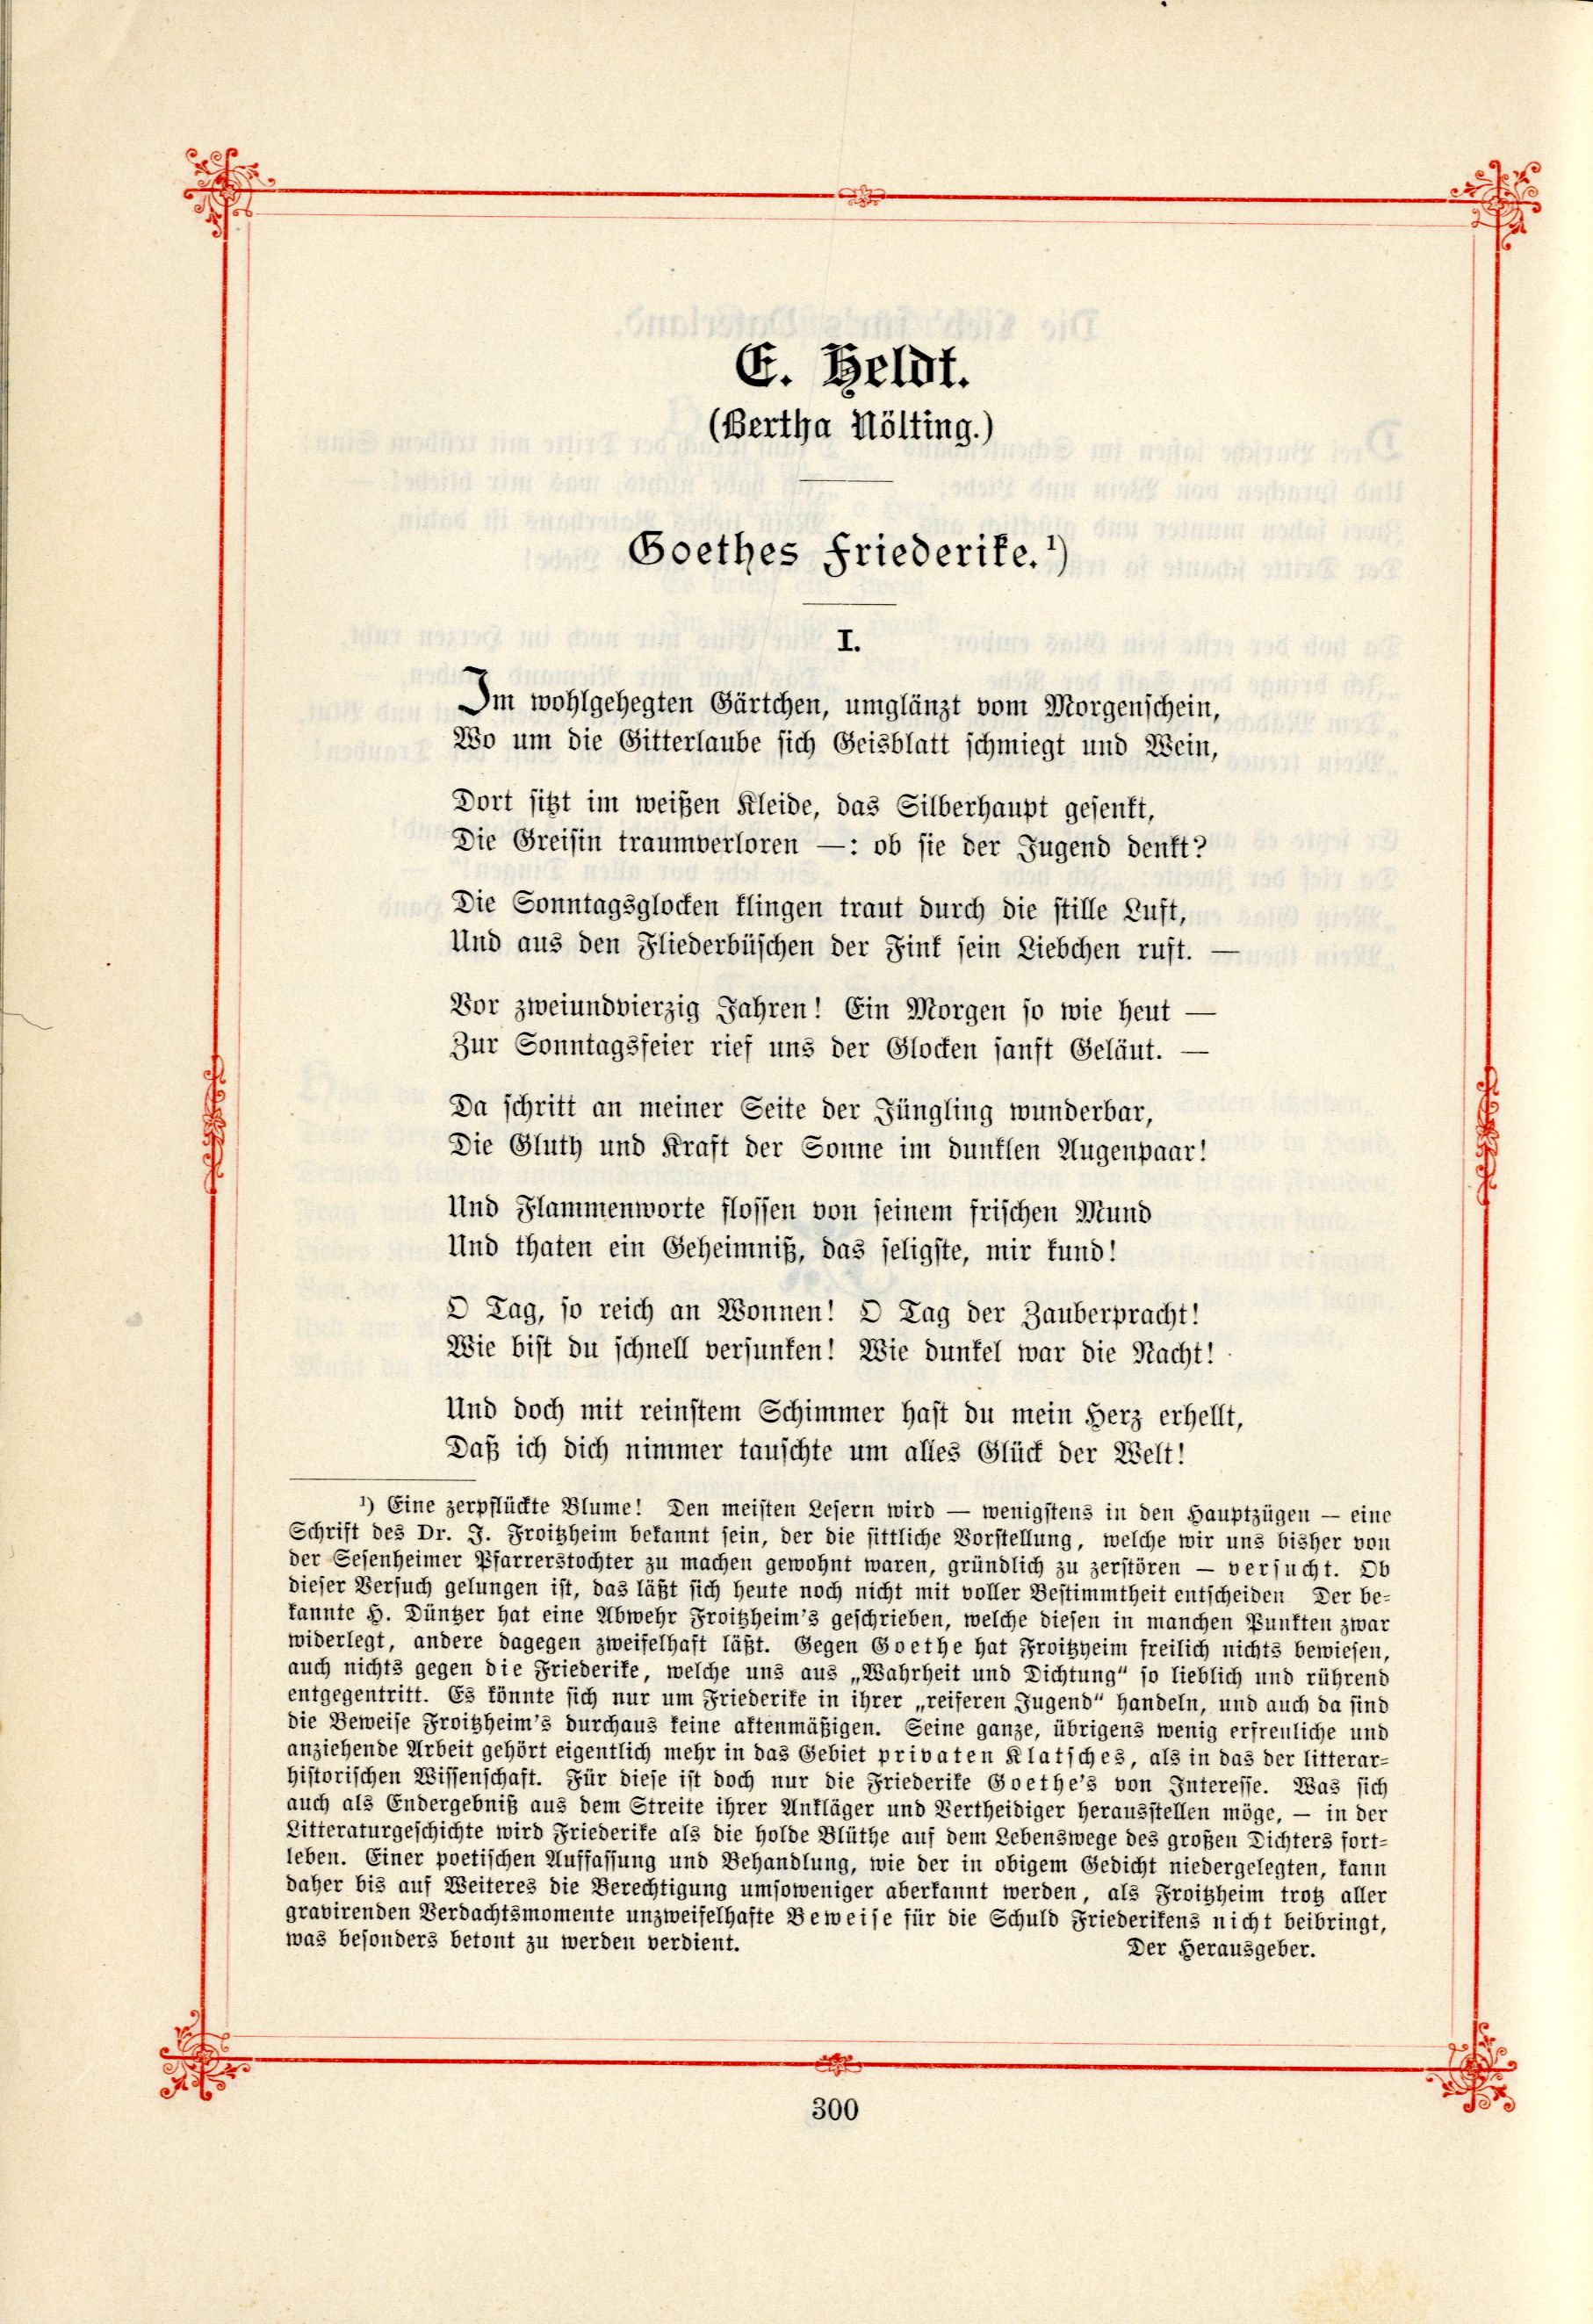 Goethes Friederike (1895) | 1. (300) Main body of text